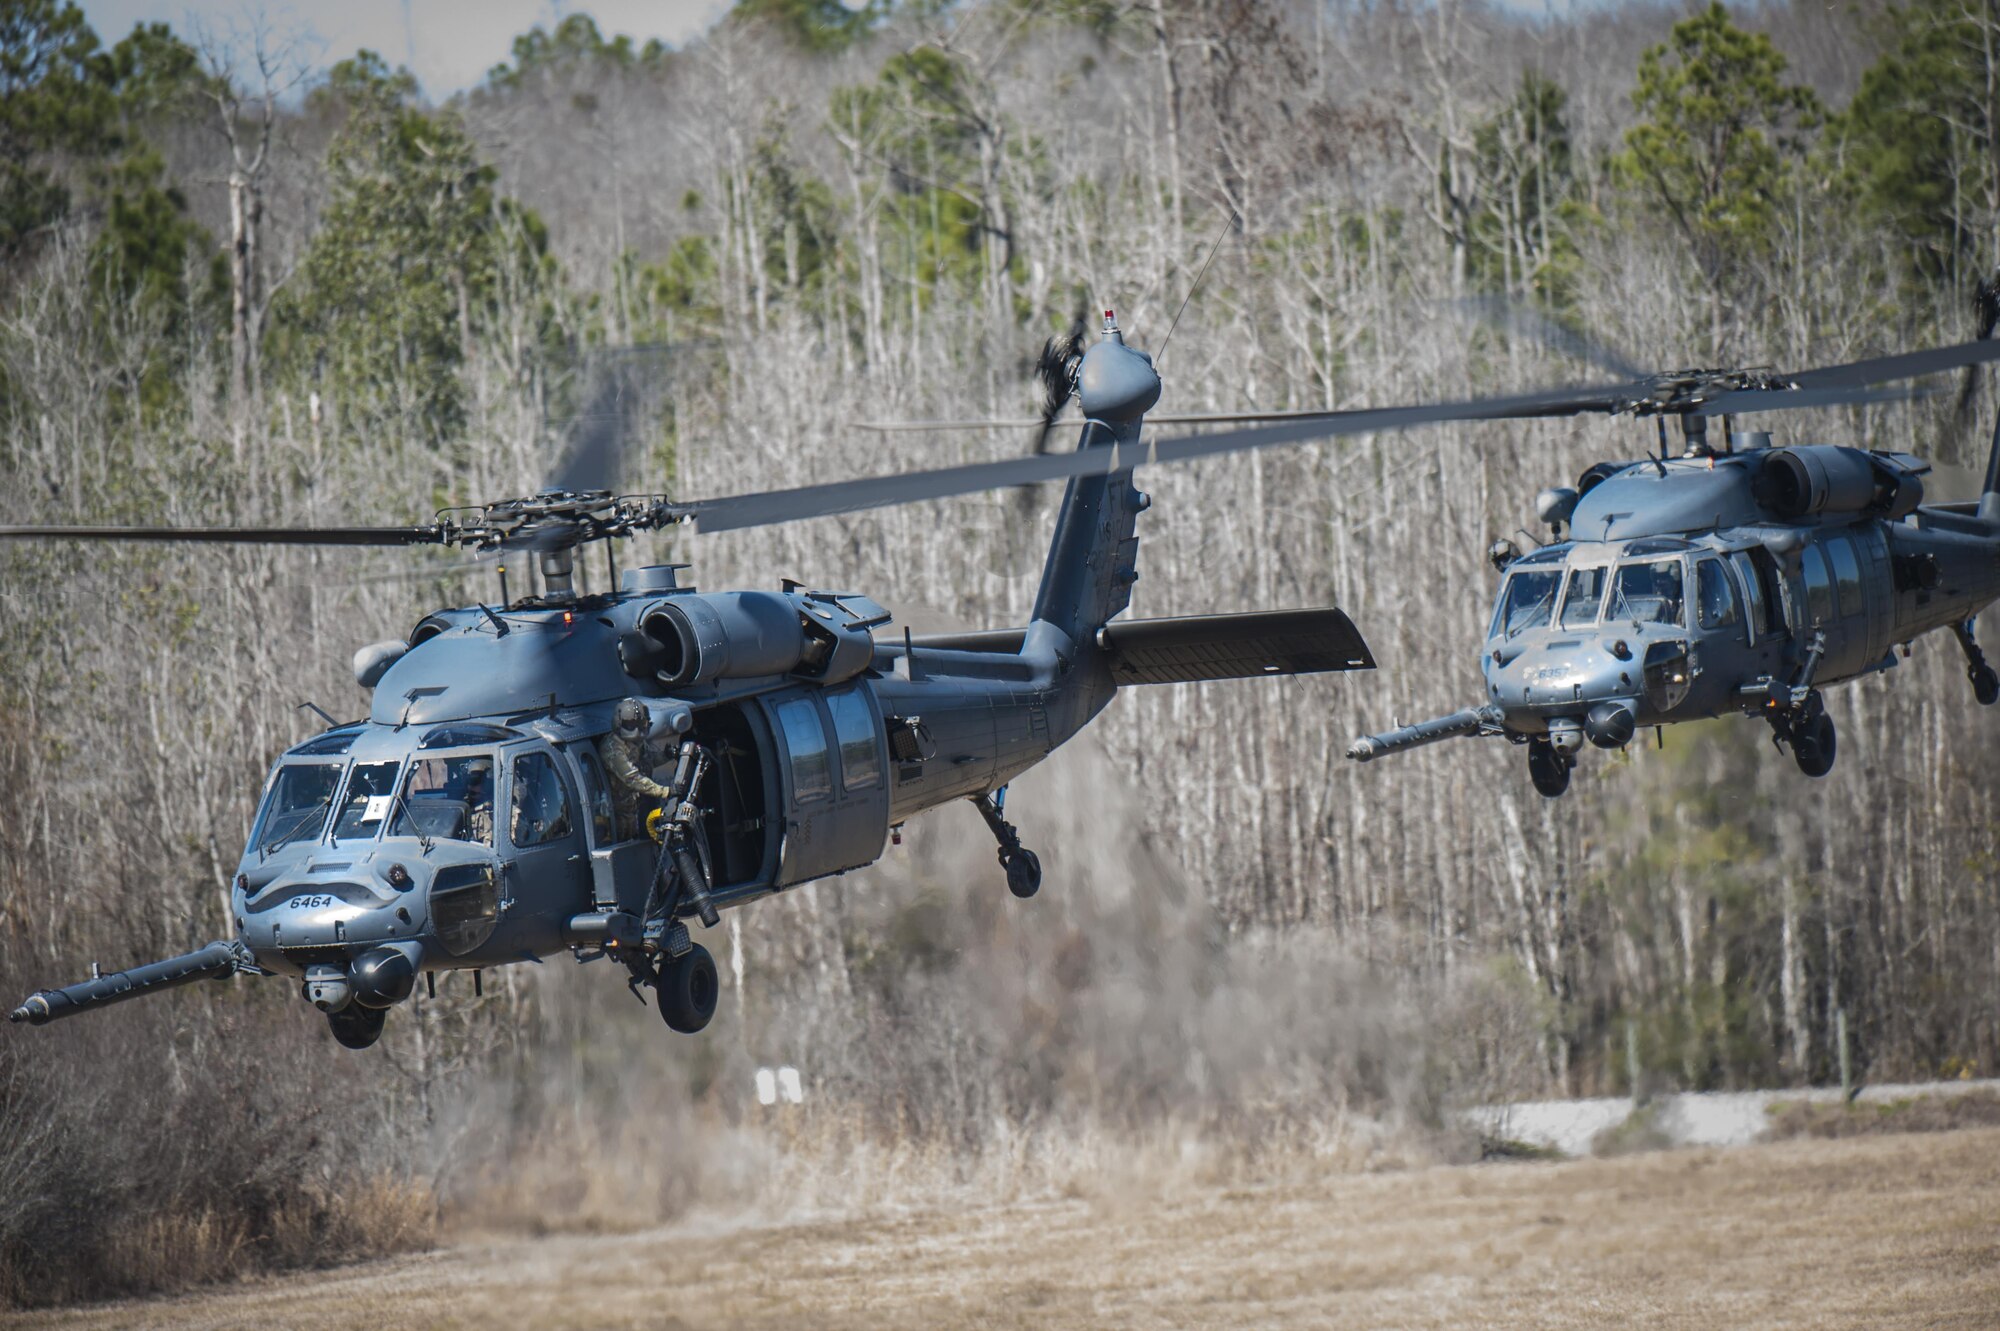 Airmen from the 41st Rescue Squadron take off in HH-60G Pave Hawk helicopters during a training exercise, Jan. 26, 2016, at Moody Air Force Base, Ga. The primary mission of the HH-60G is to conduct rescue operations in hostile environments to recover isolated personnel. (U.S. Air Force photo by Airman 1st Class Lauren M. Johnson/Released)